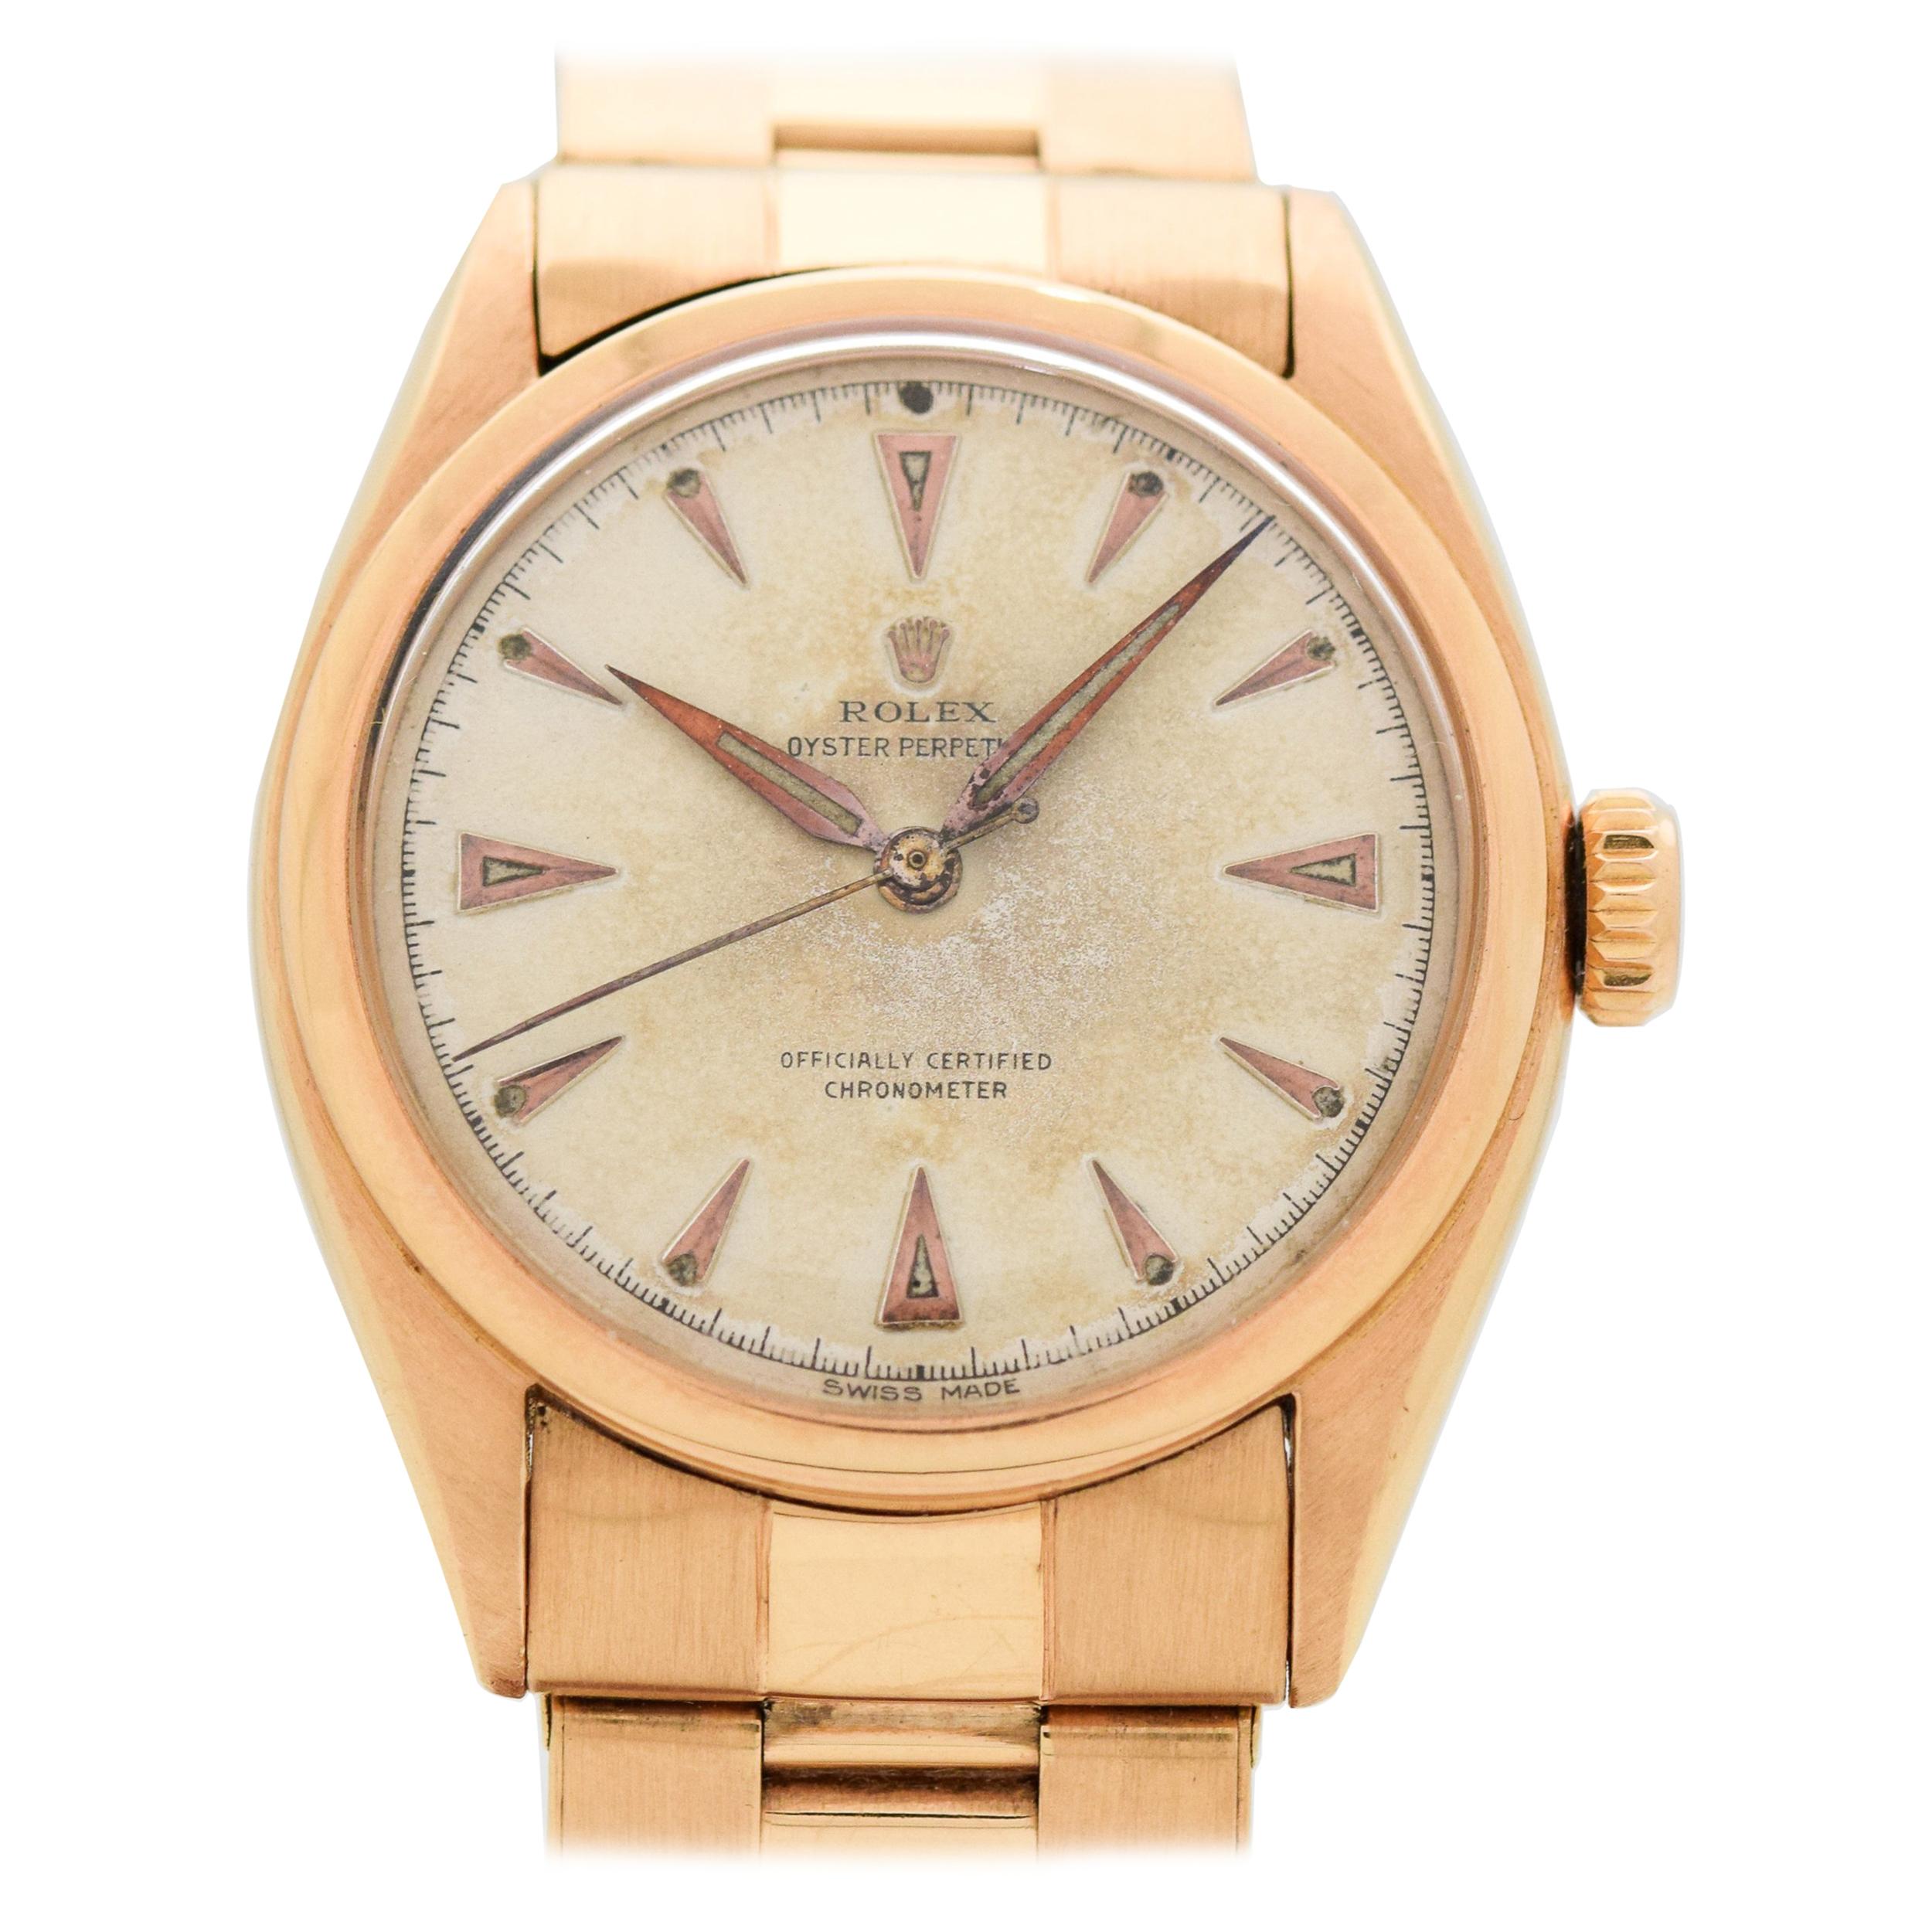 Vintage Rolex Oyster Perpetual Reference 6084 in 18 Karat Rose Gold, 1950